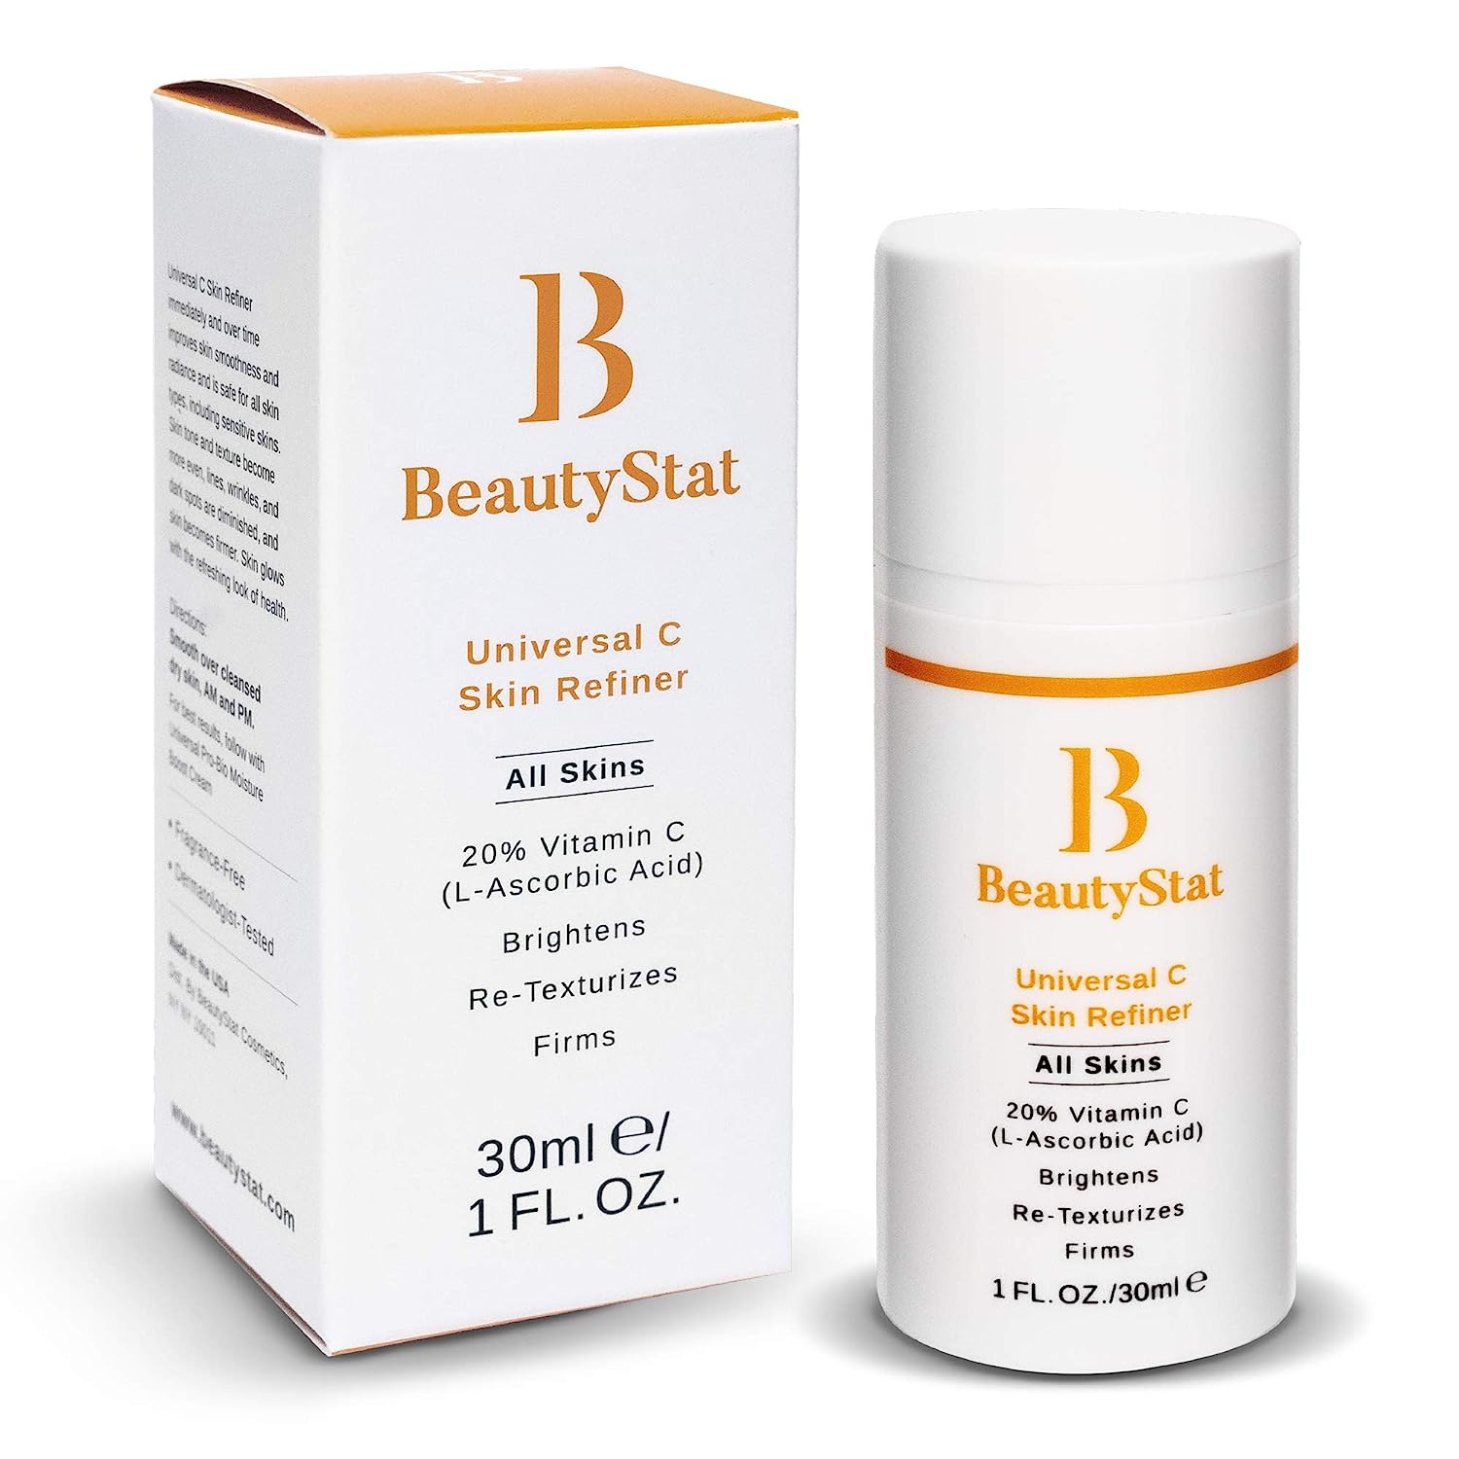 BeautyStat Universal C Refiner, one of the best vitamin c skincare products